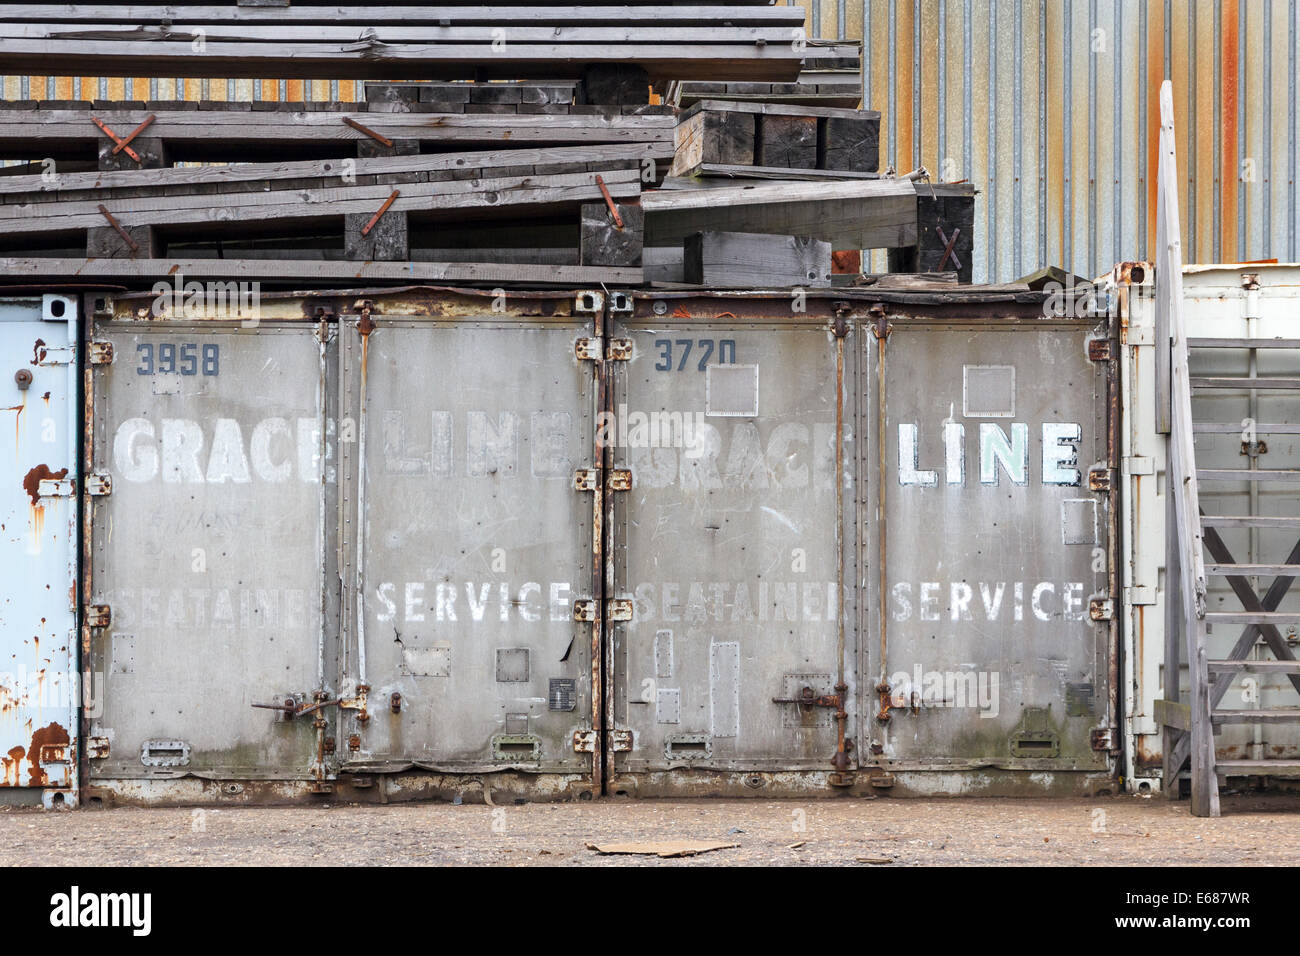 Worn and weathered industrial equipment at a shipyard. Stock Photo